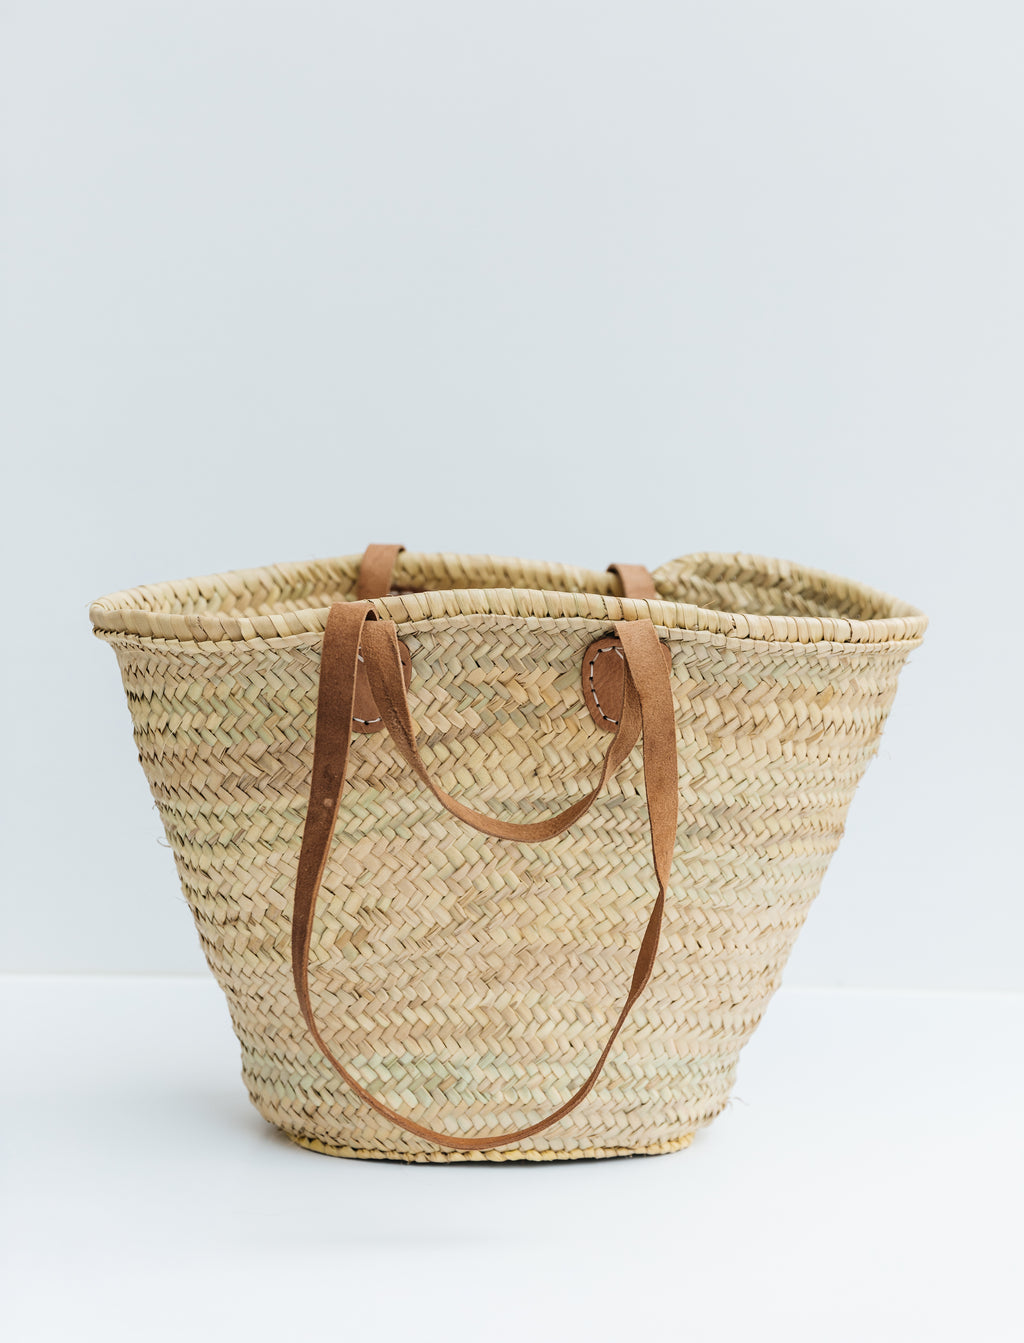 FRENCH BASKET with double flat leather handles, straw bag, beach